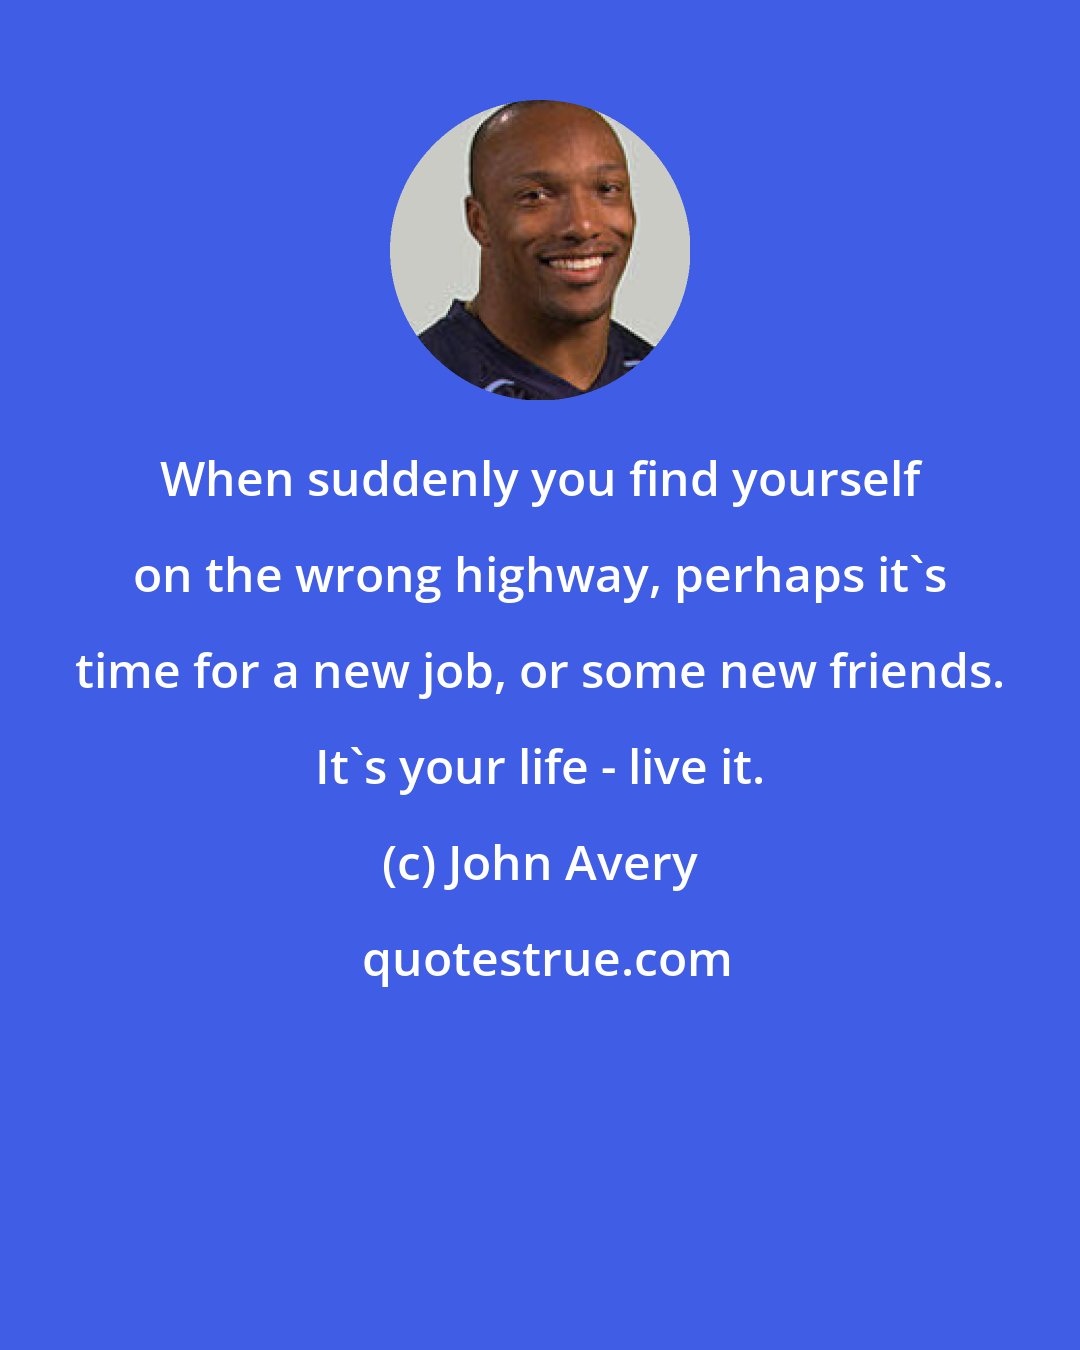 John Avery: ​When suddenly you find yourself on the wrong highway, perhaps it's time for a new job, or some new friends. It's your life - live it.